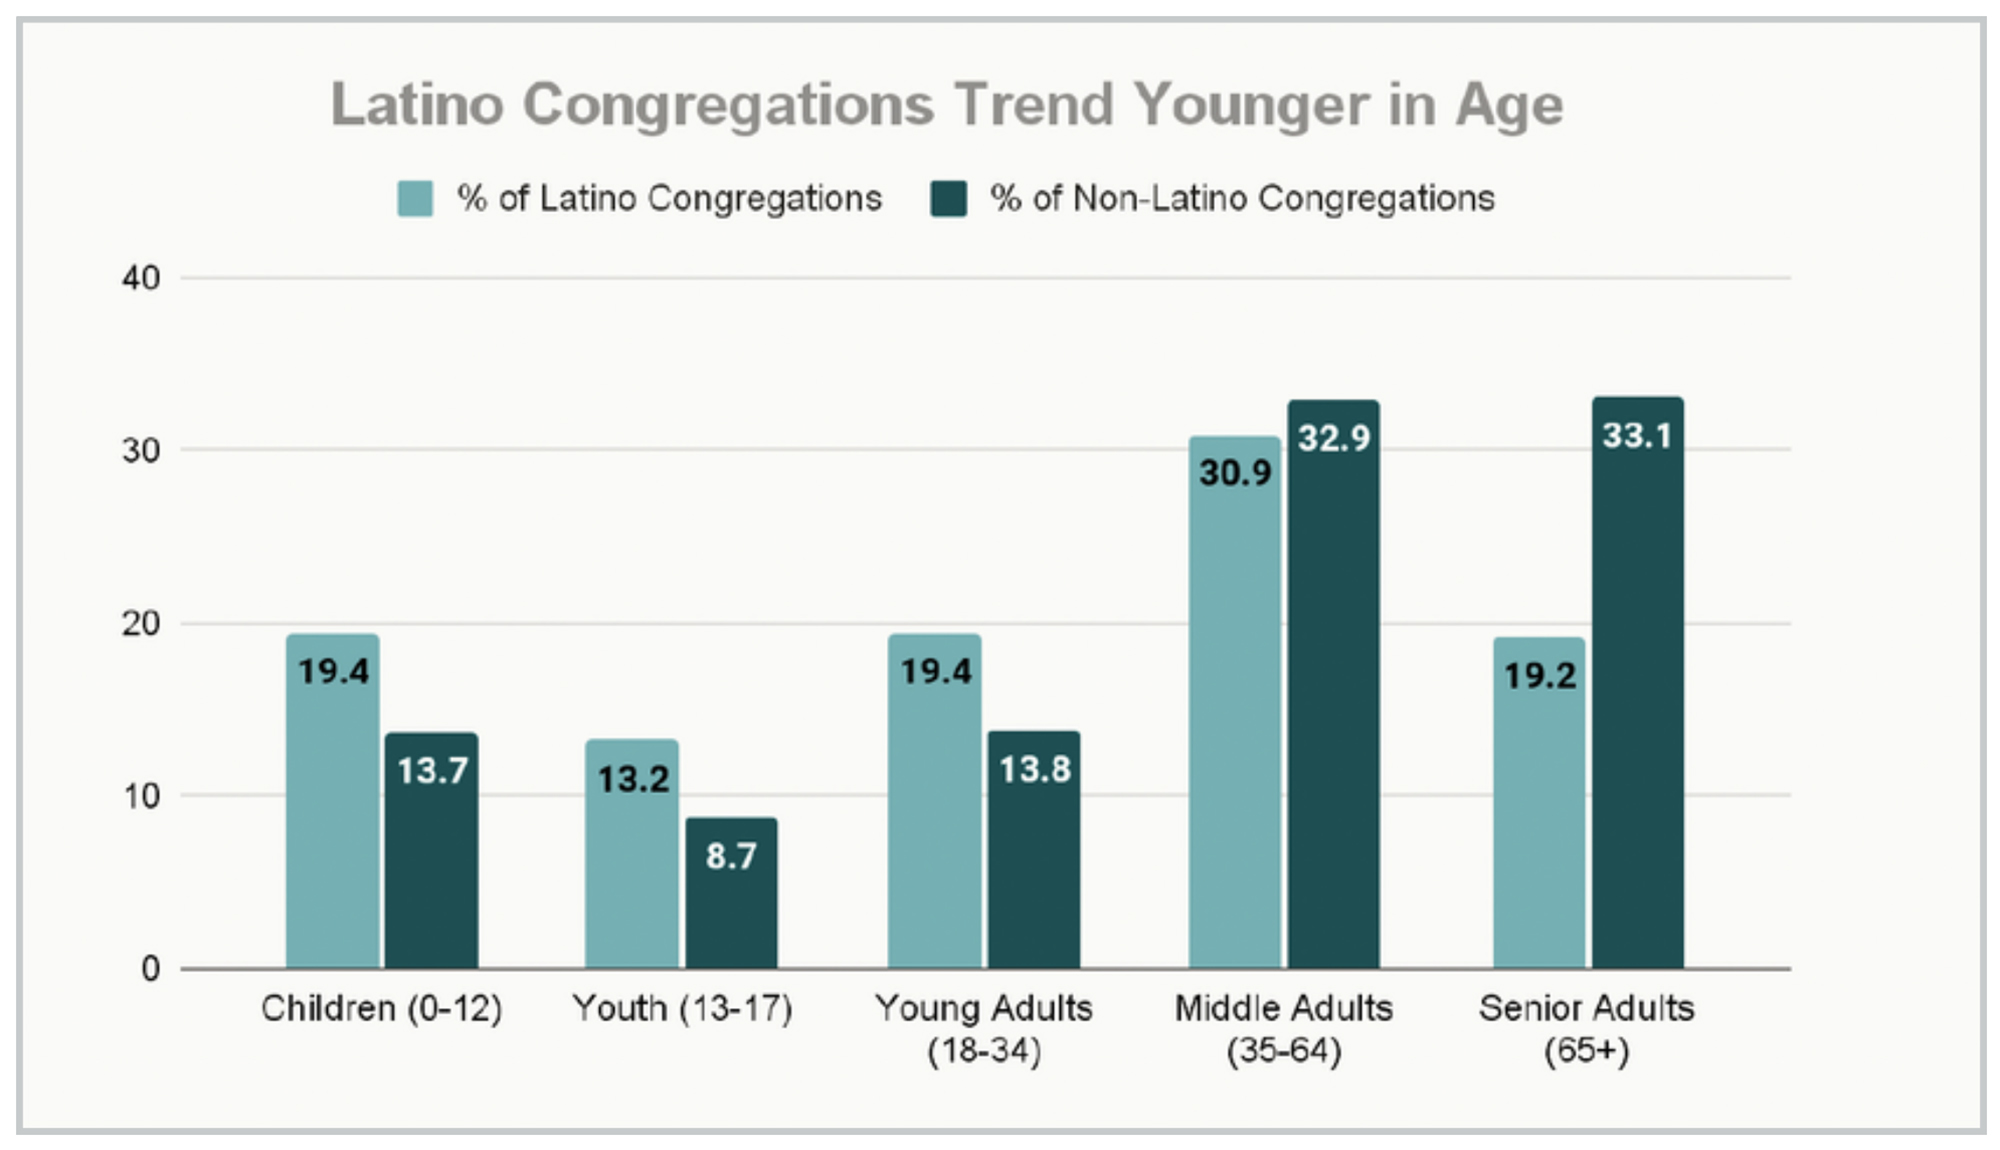 "Latino Congregations Trend Younger in Age" (Graphic courtesy Hartford Institute for Religion Research)